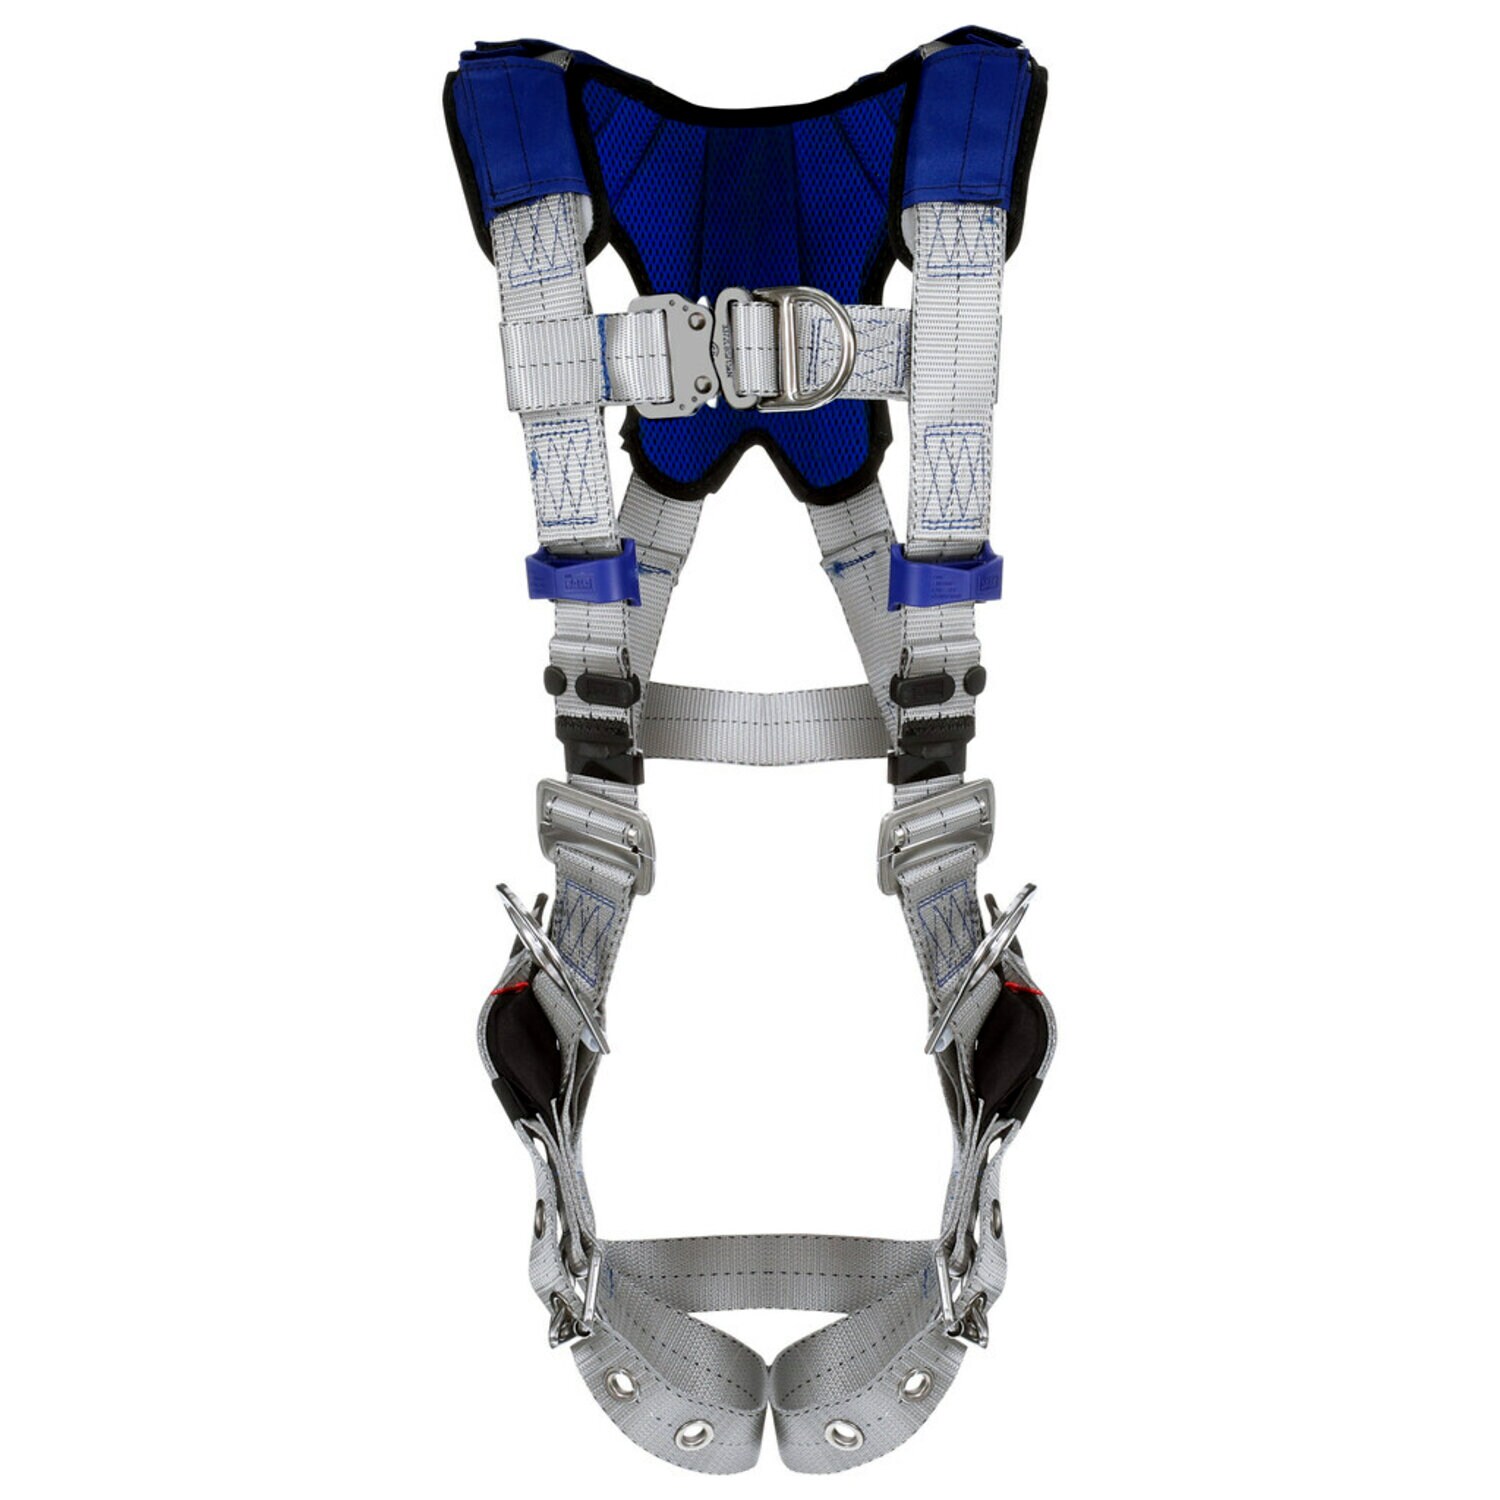 7012817696 - 3M DBI-SALA ExoFit X100 Comfort Climbing/Positioning Safety Harness 1401215, Small, Stainless Steel Hardware